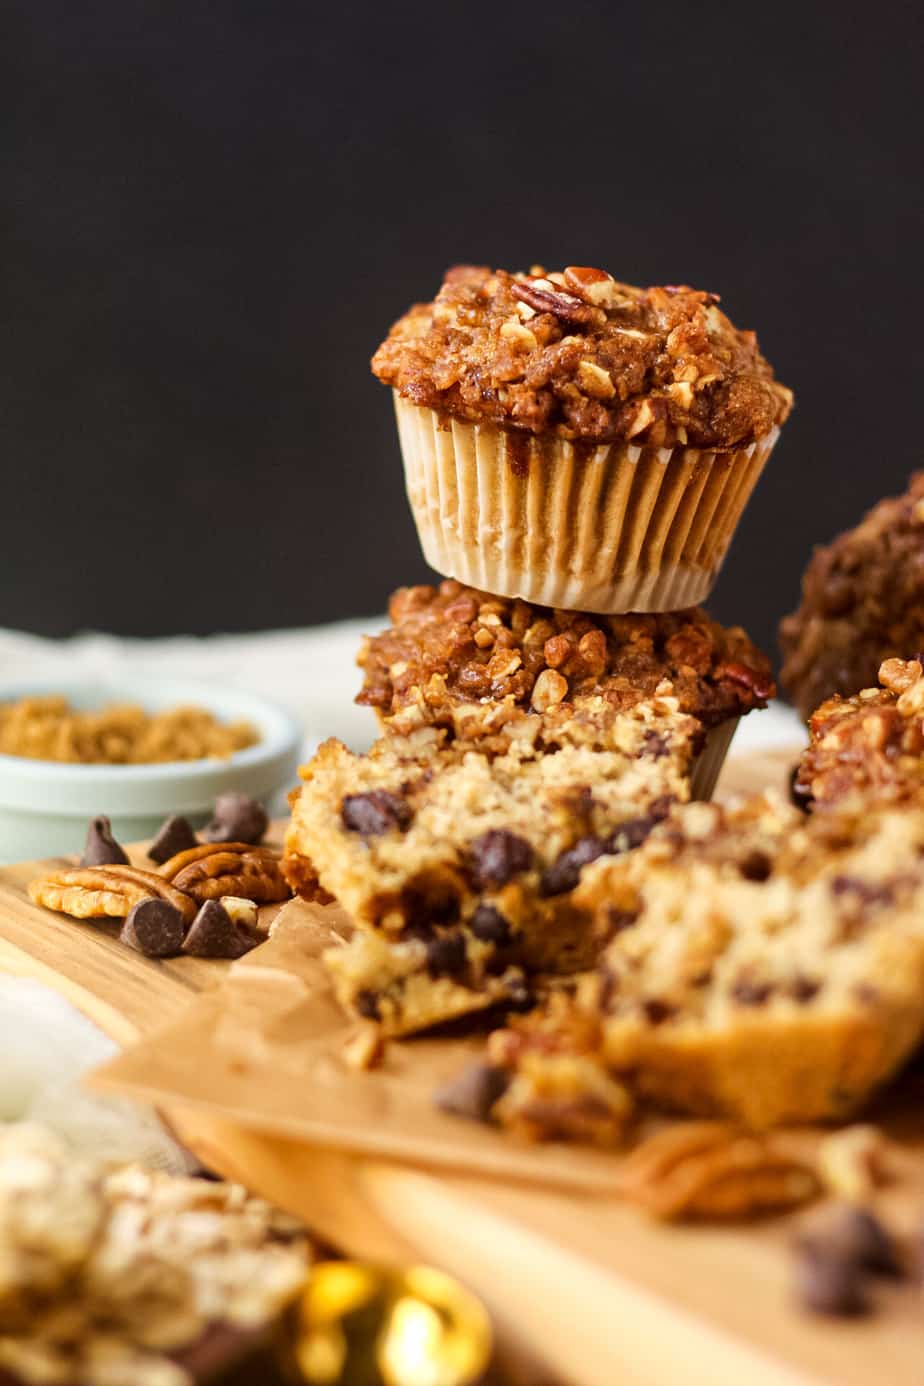 side angle shot of chocolate chip oat muffins with pecan streusel topping on a wooden cutting board sitting on a baking pan with oats and pecans in perimeter of shot.